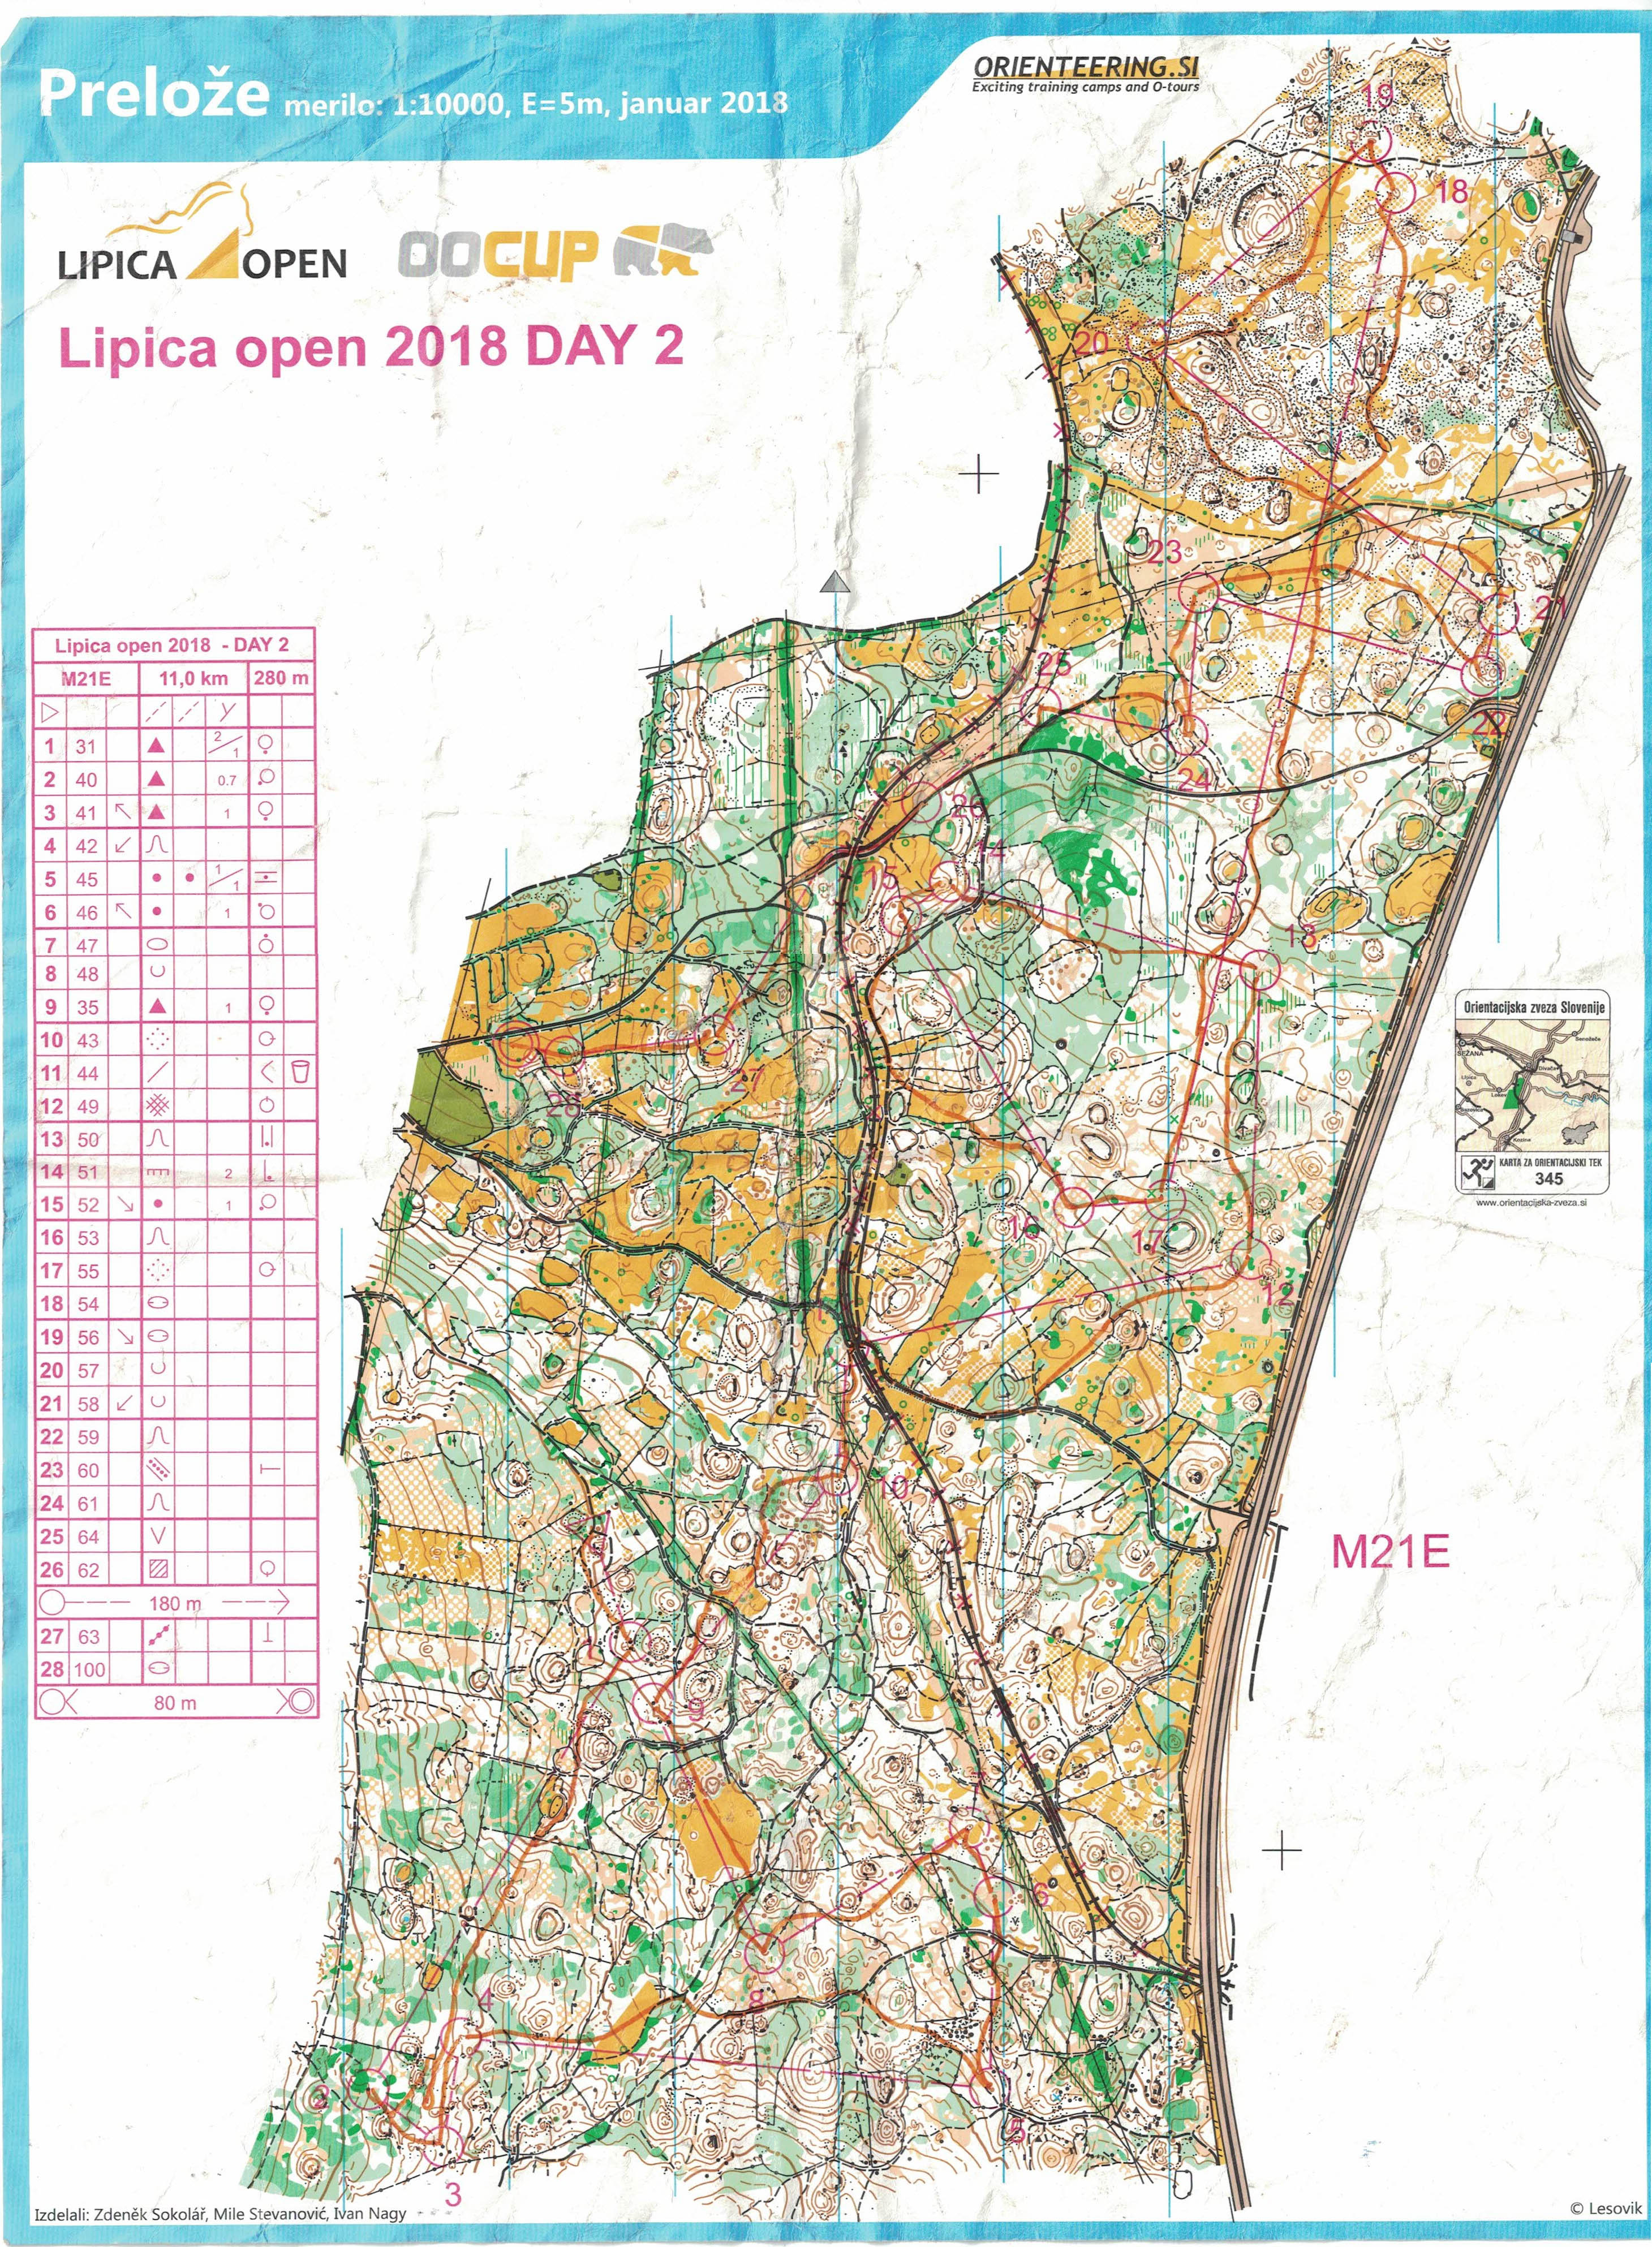 Lipica Open Day 2 (11-03-2018)